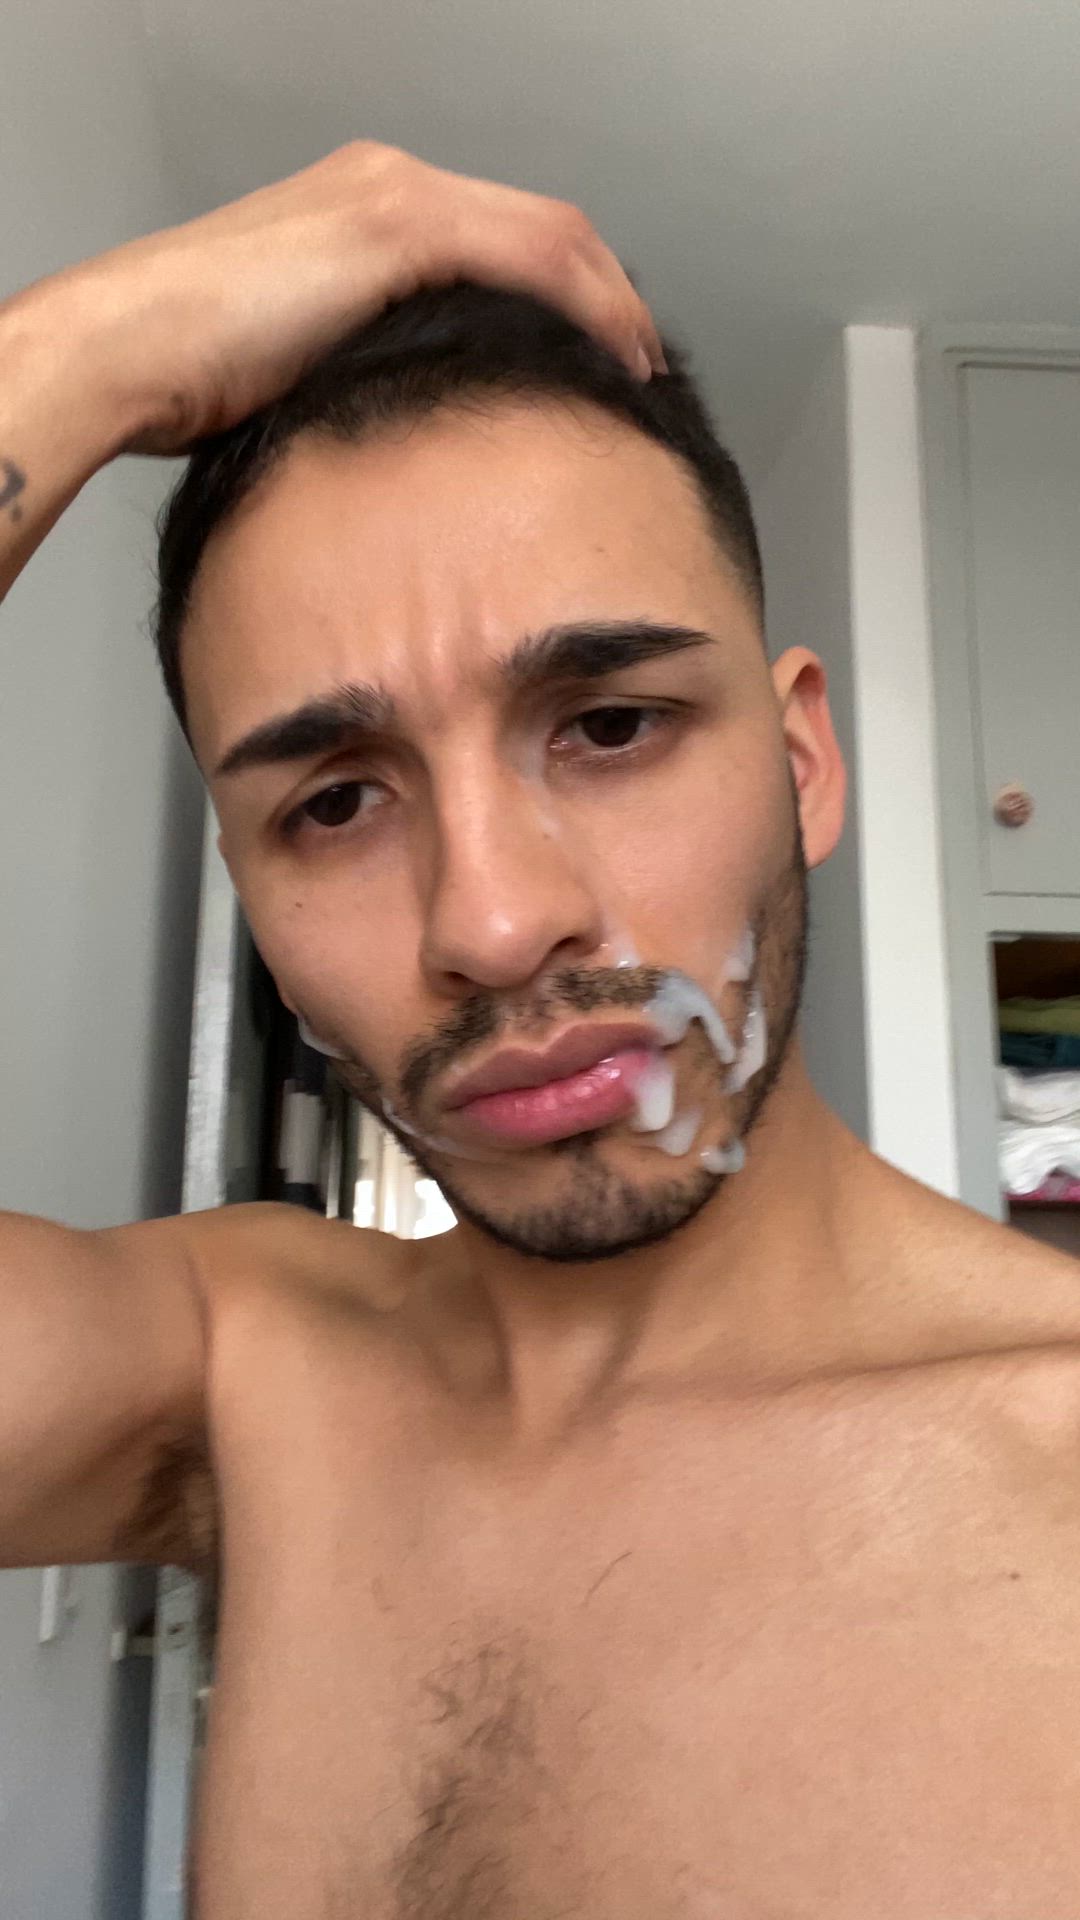 Cumshot porn video with onlyfans model pauloxxx <strong>@paulolatin</strong>